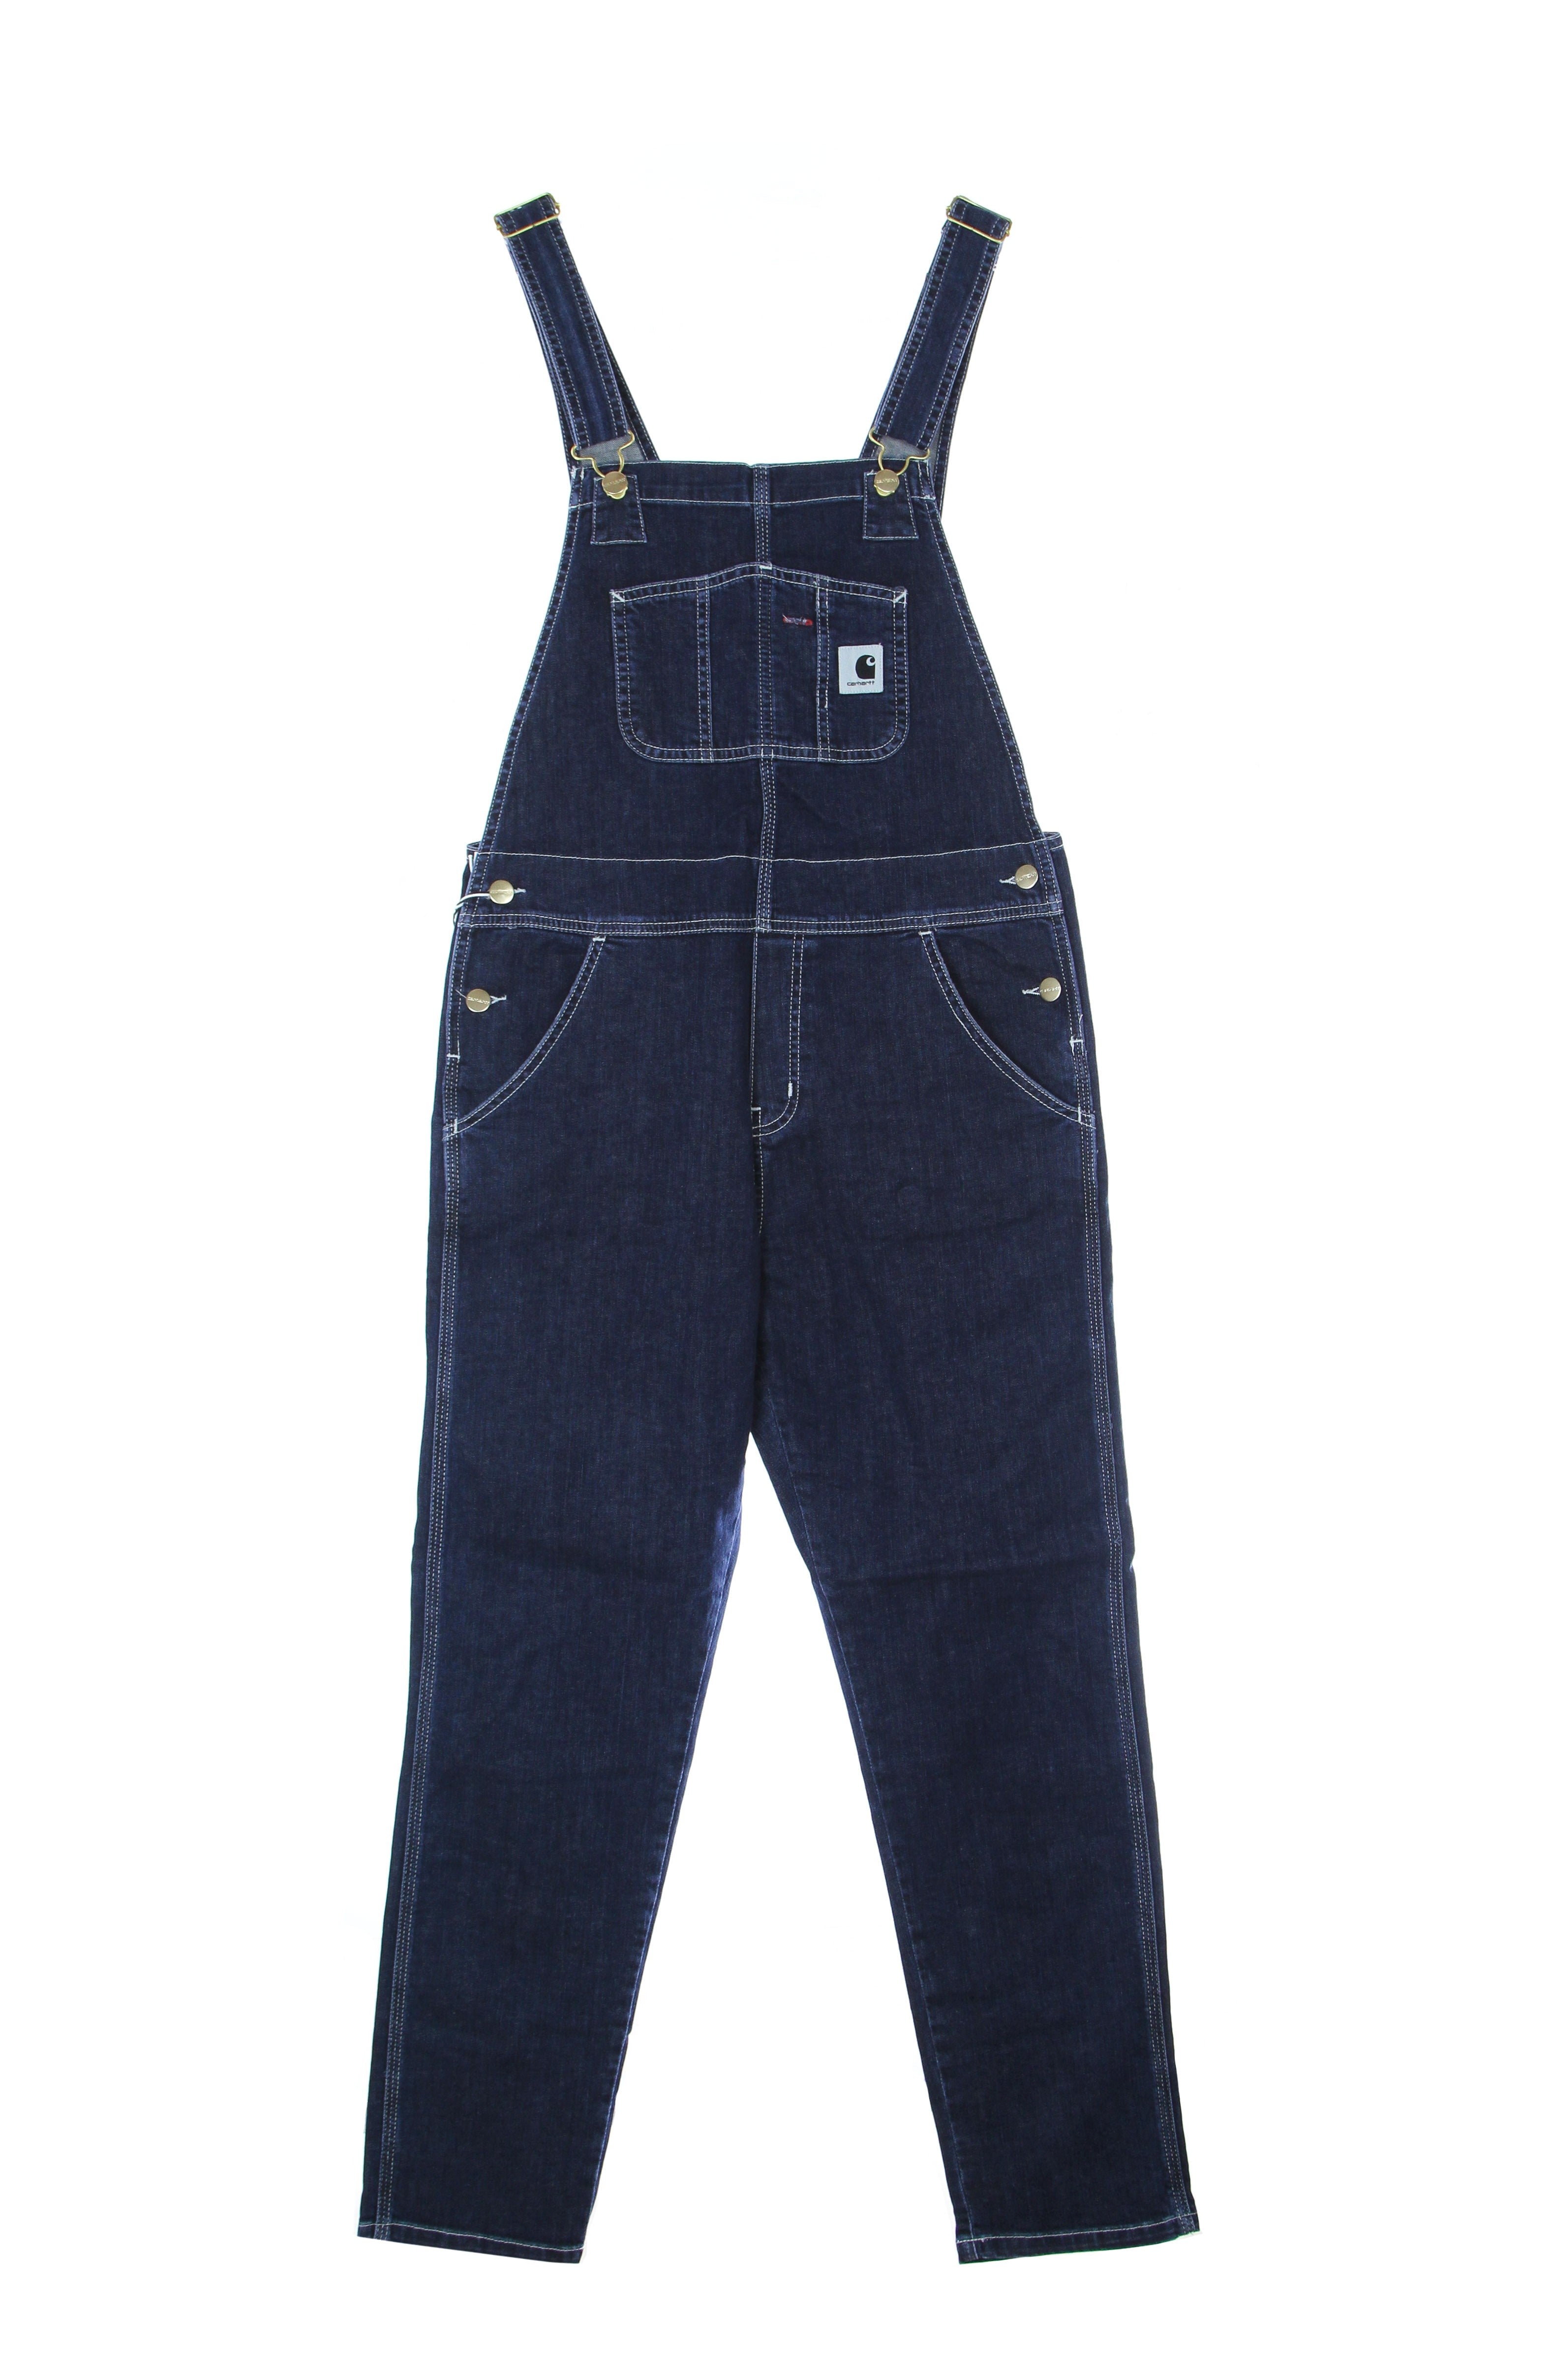 Carhartt Wip, Salopette Donna W Bib Overall, Blue Stone Washed